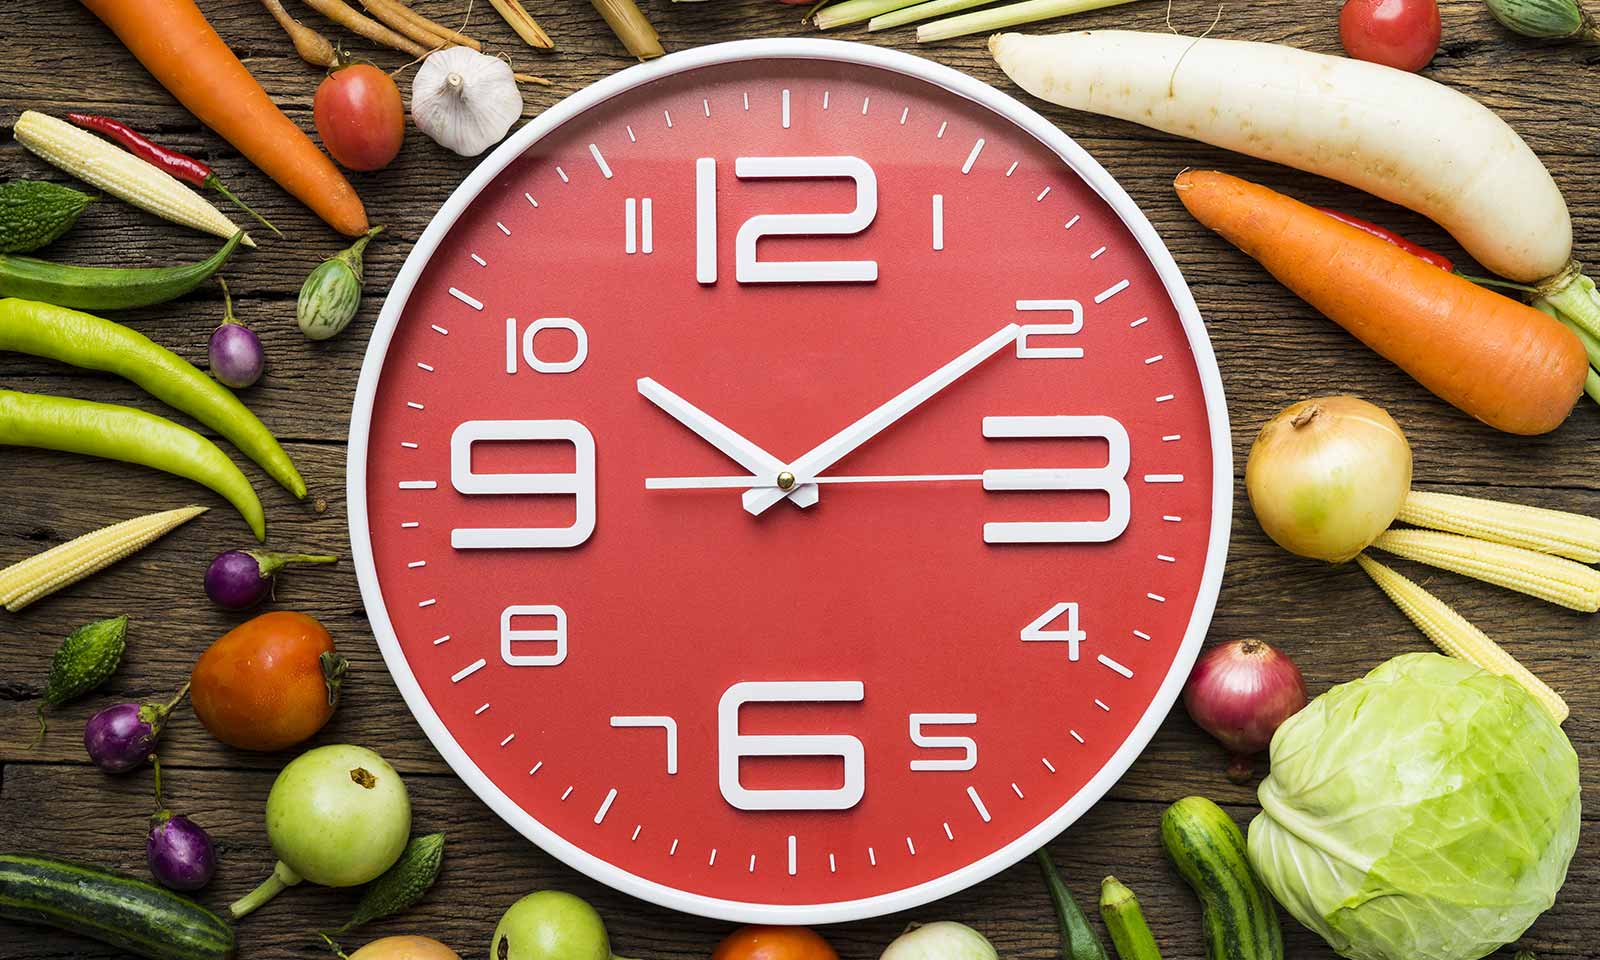 8-pros-and-cons-of-intermittent-fasting-diets